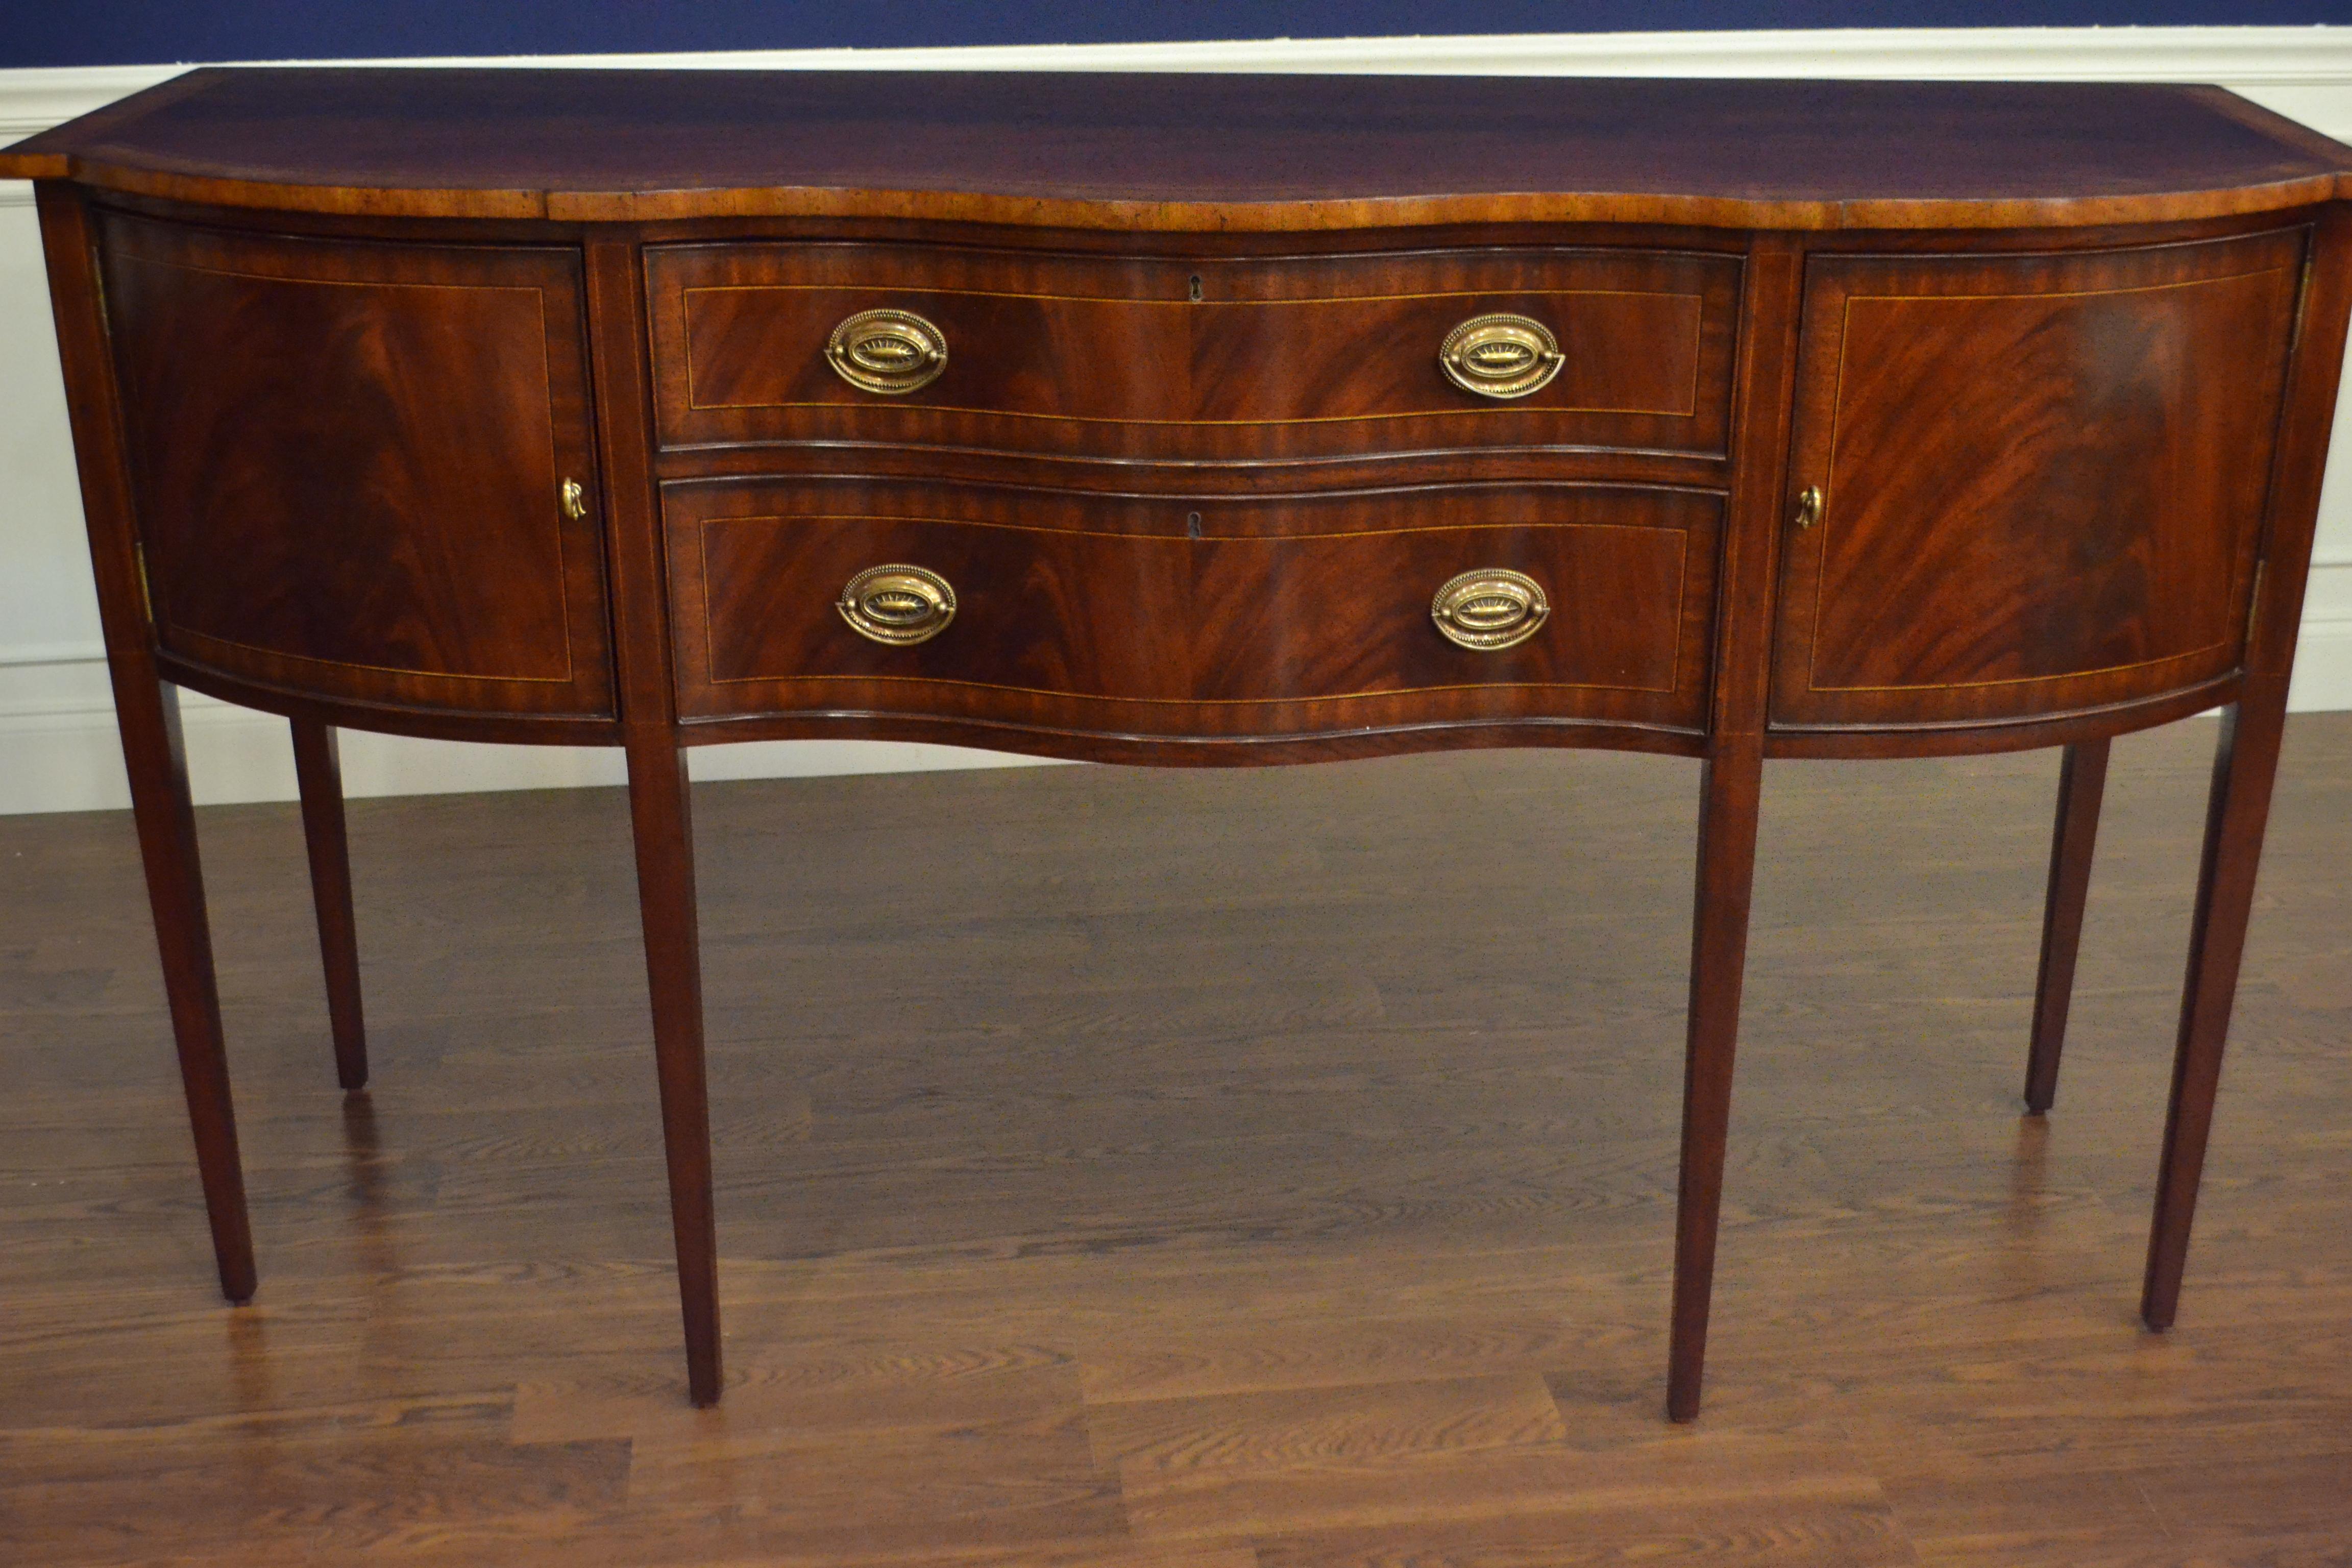 Mahogany Hepplewhite Style Sideboard by Leighton Hall In New Condition For Sale In Suwanee, GA